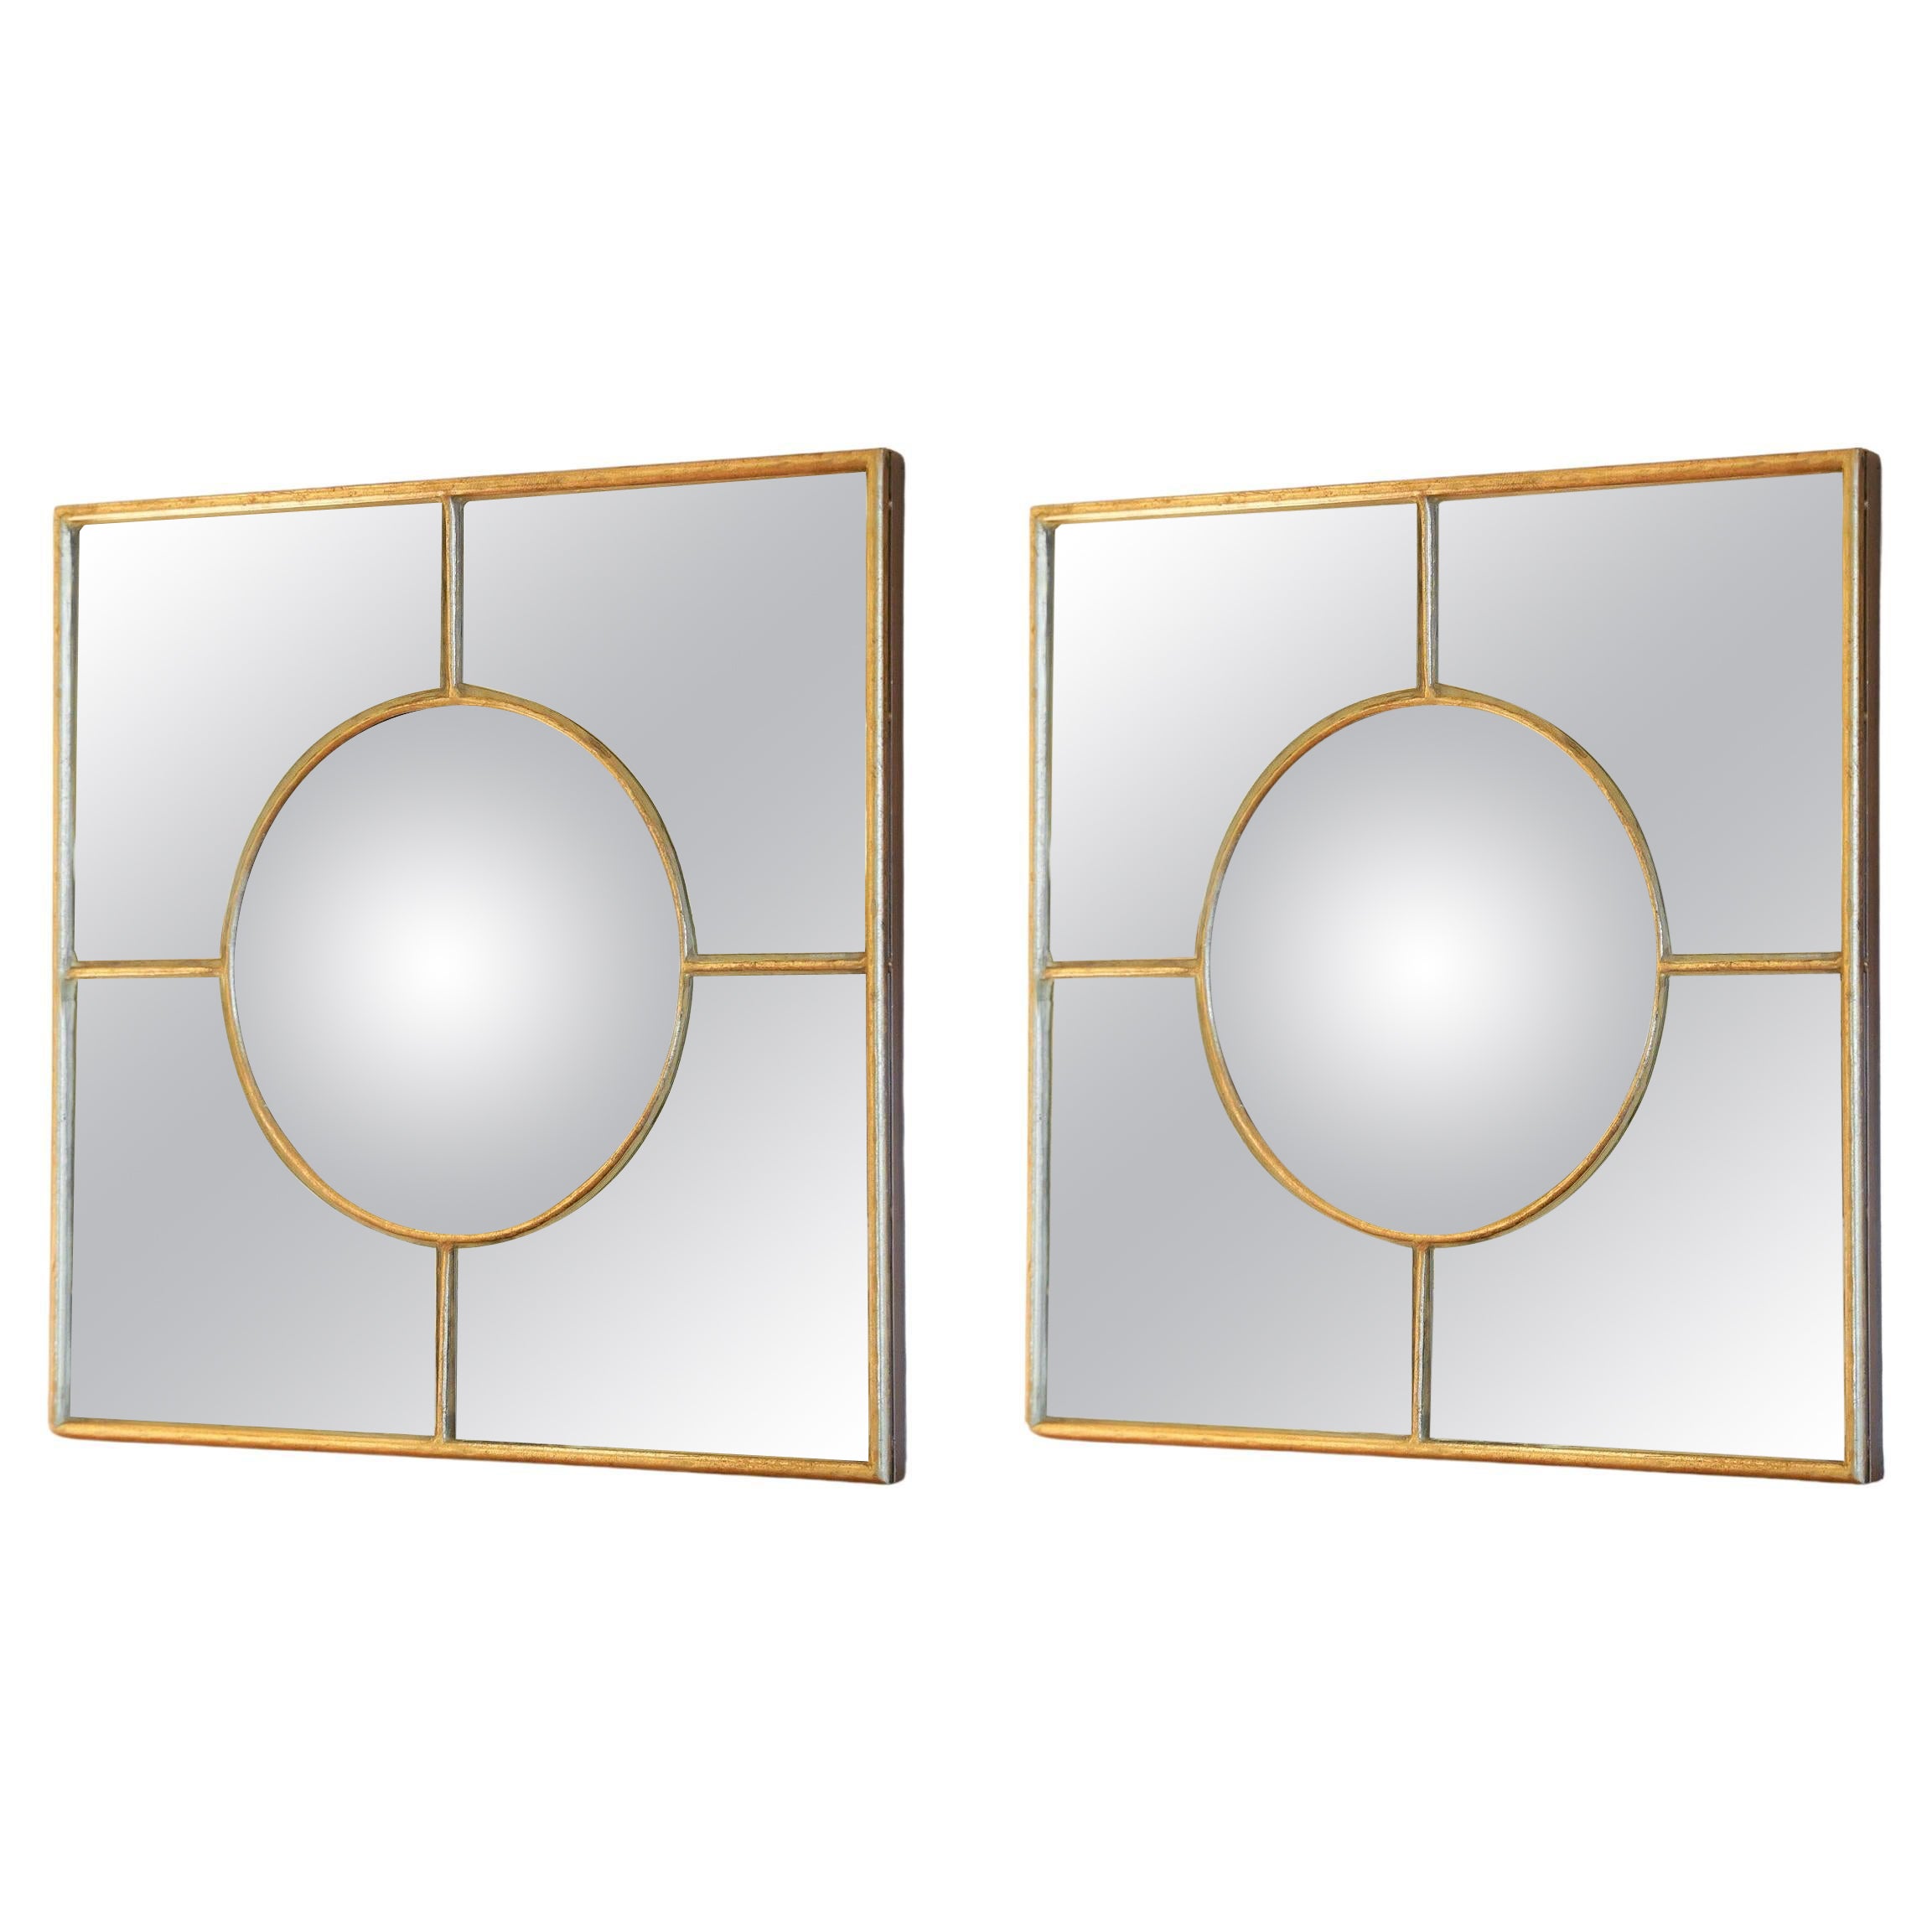 Beautiful pair of gilded wood mirrors.

Composed of a gilded wooden frame forming a square.
Inside the frame is a witch's mirror placed in the center, framed by 4 small mirrors underlining the witch's mirror, each mirror highlighted by gilded wooden